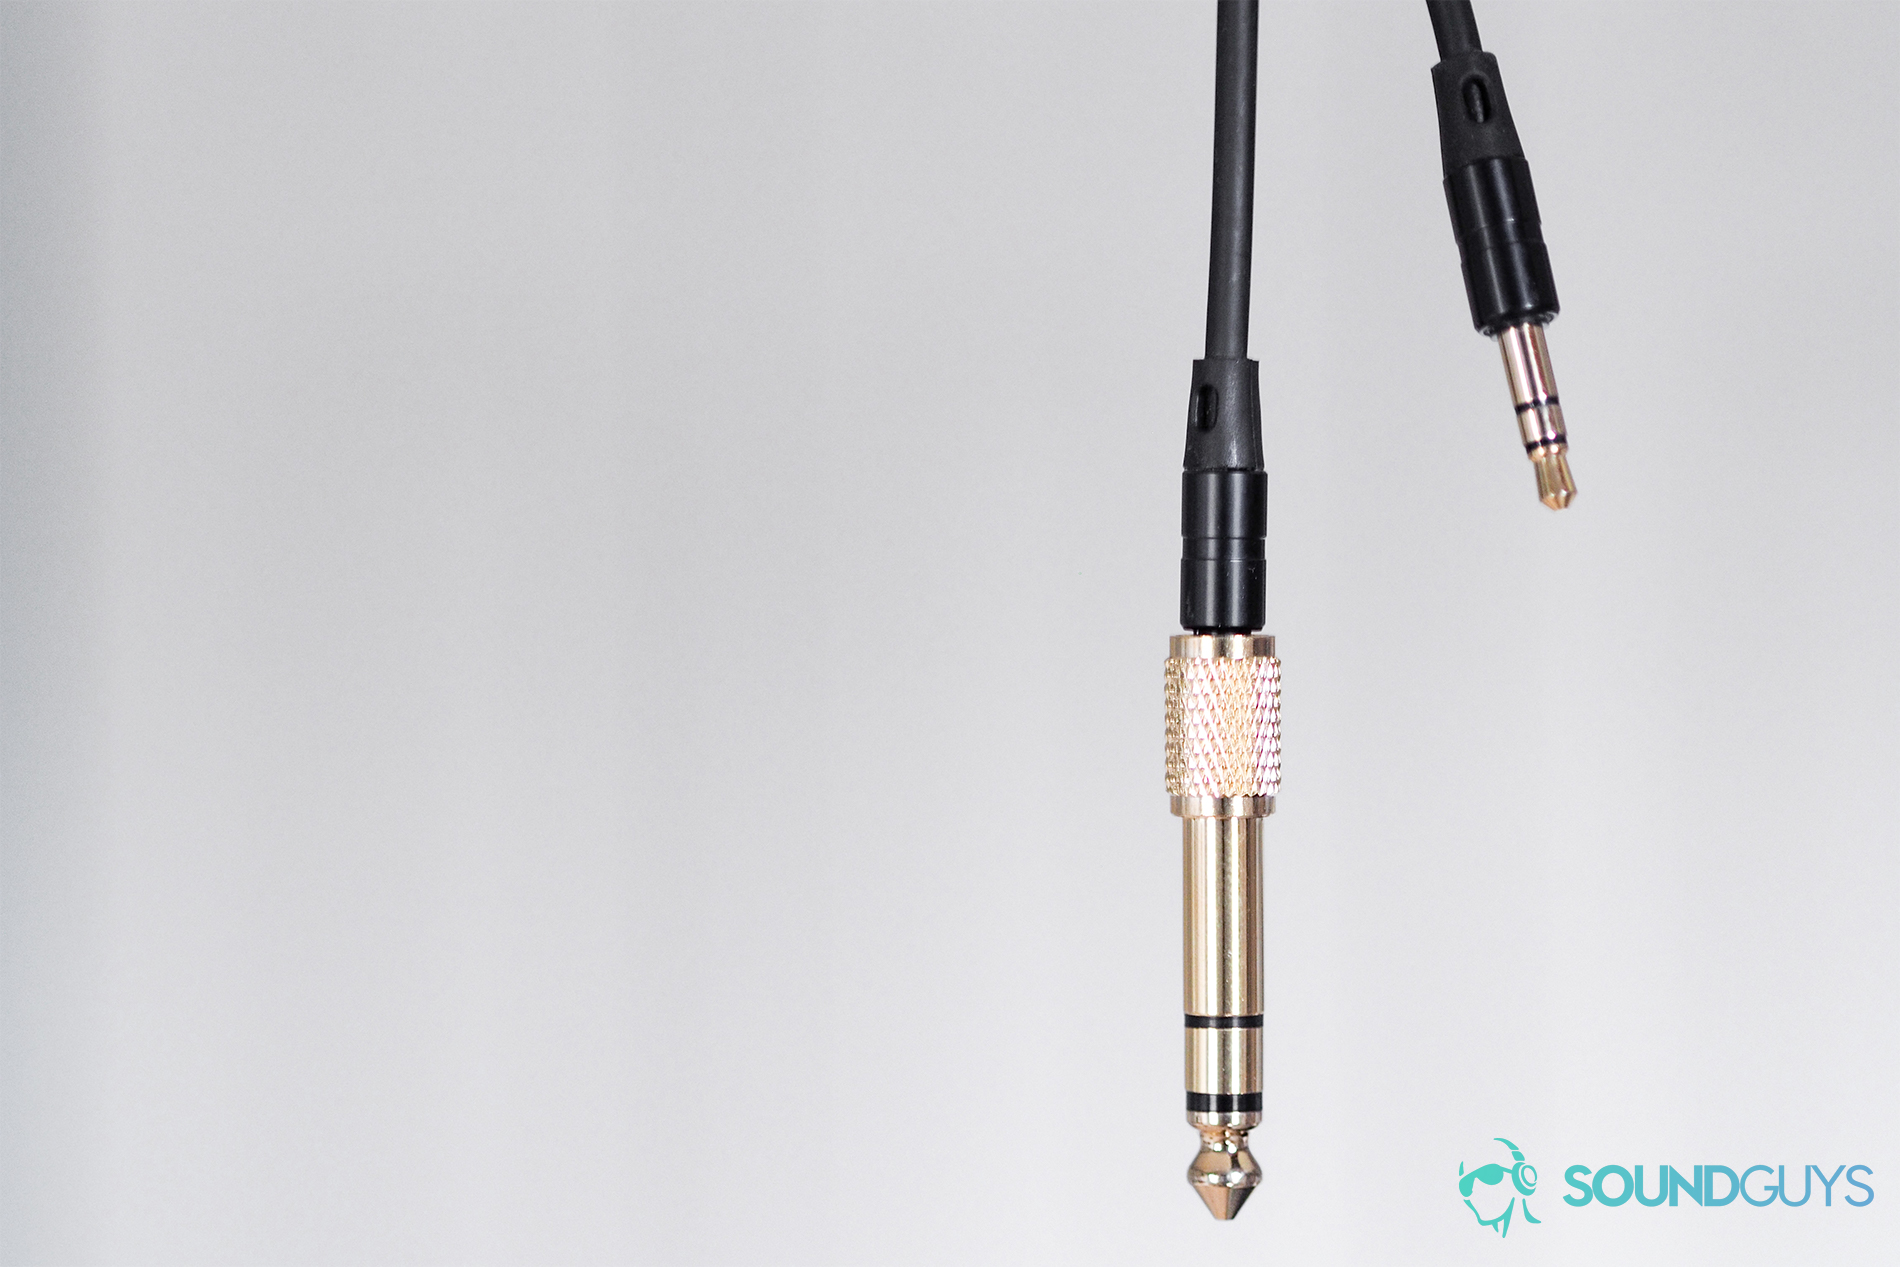 3.5mm Mono Male to RCA Male Cable, 3.5mm Audio Auxiliary Jack on One End  and RCA Audio Jack on Other End, 6 Feet, Black